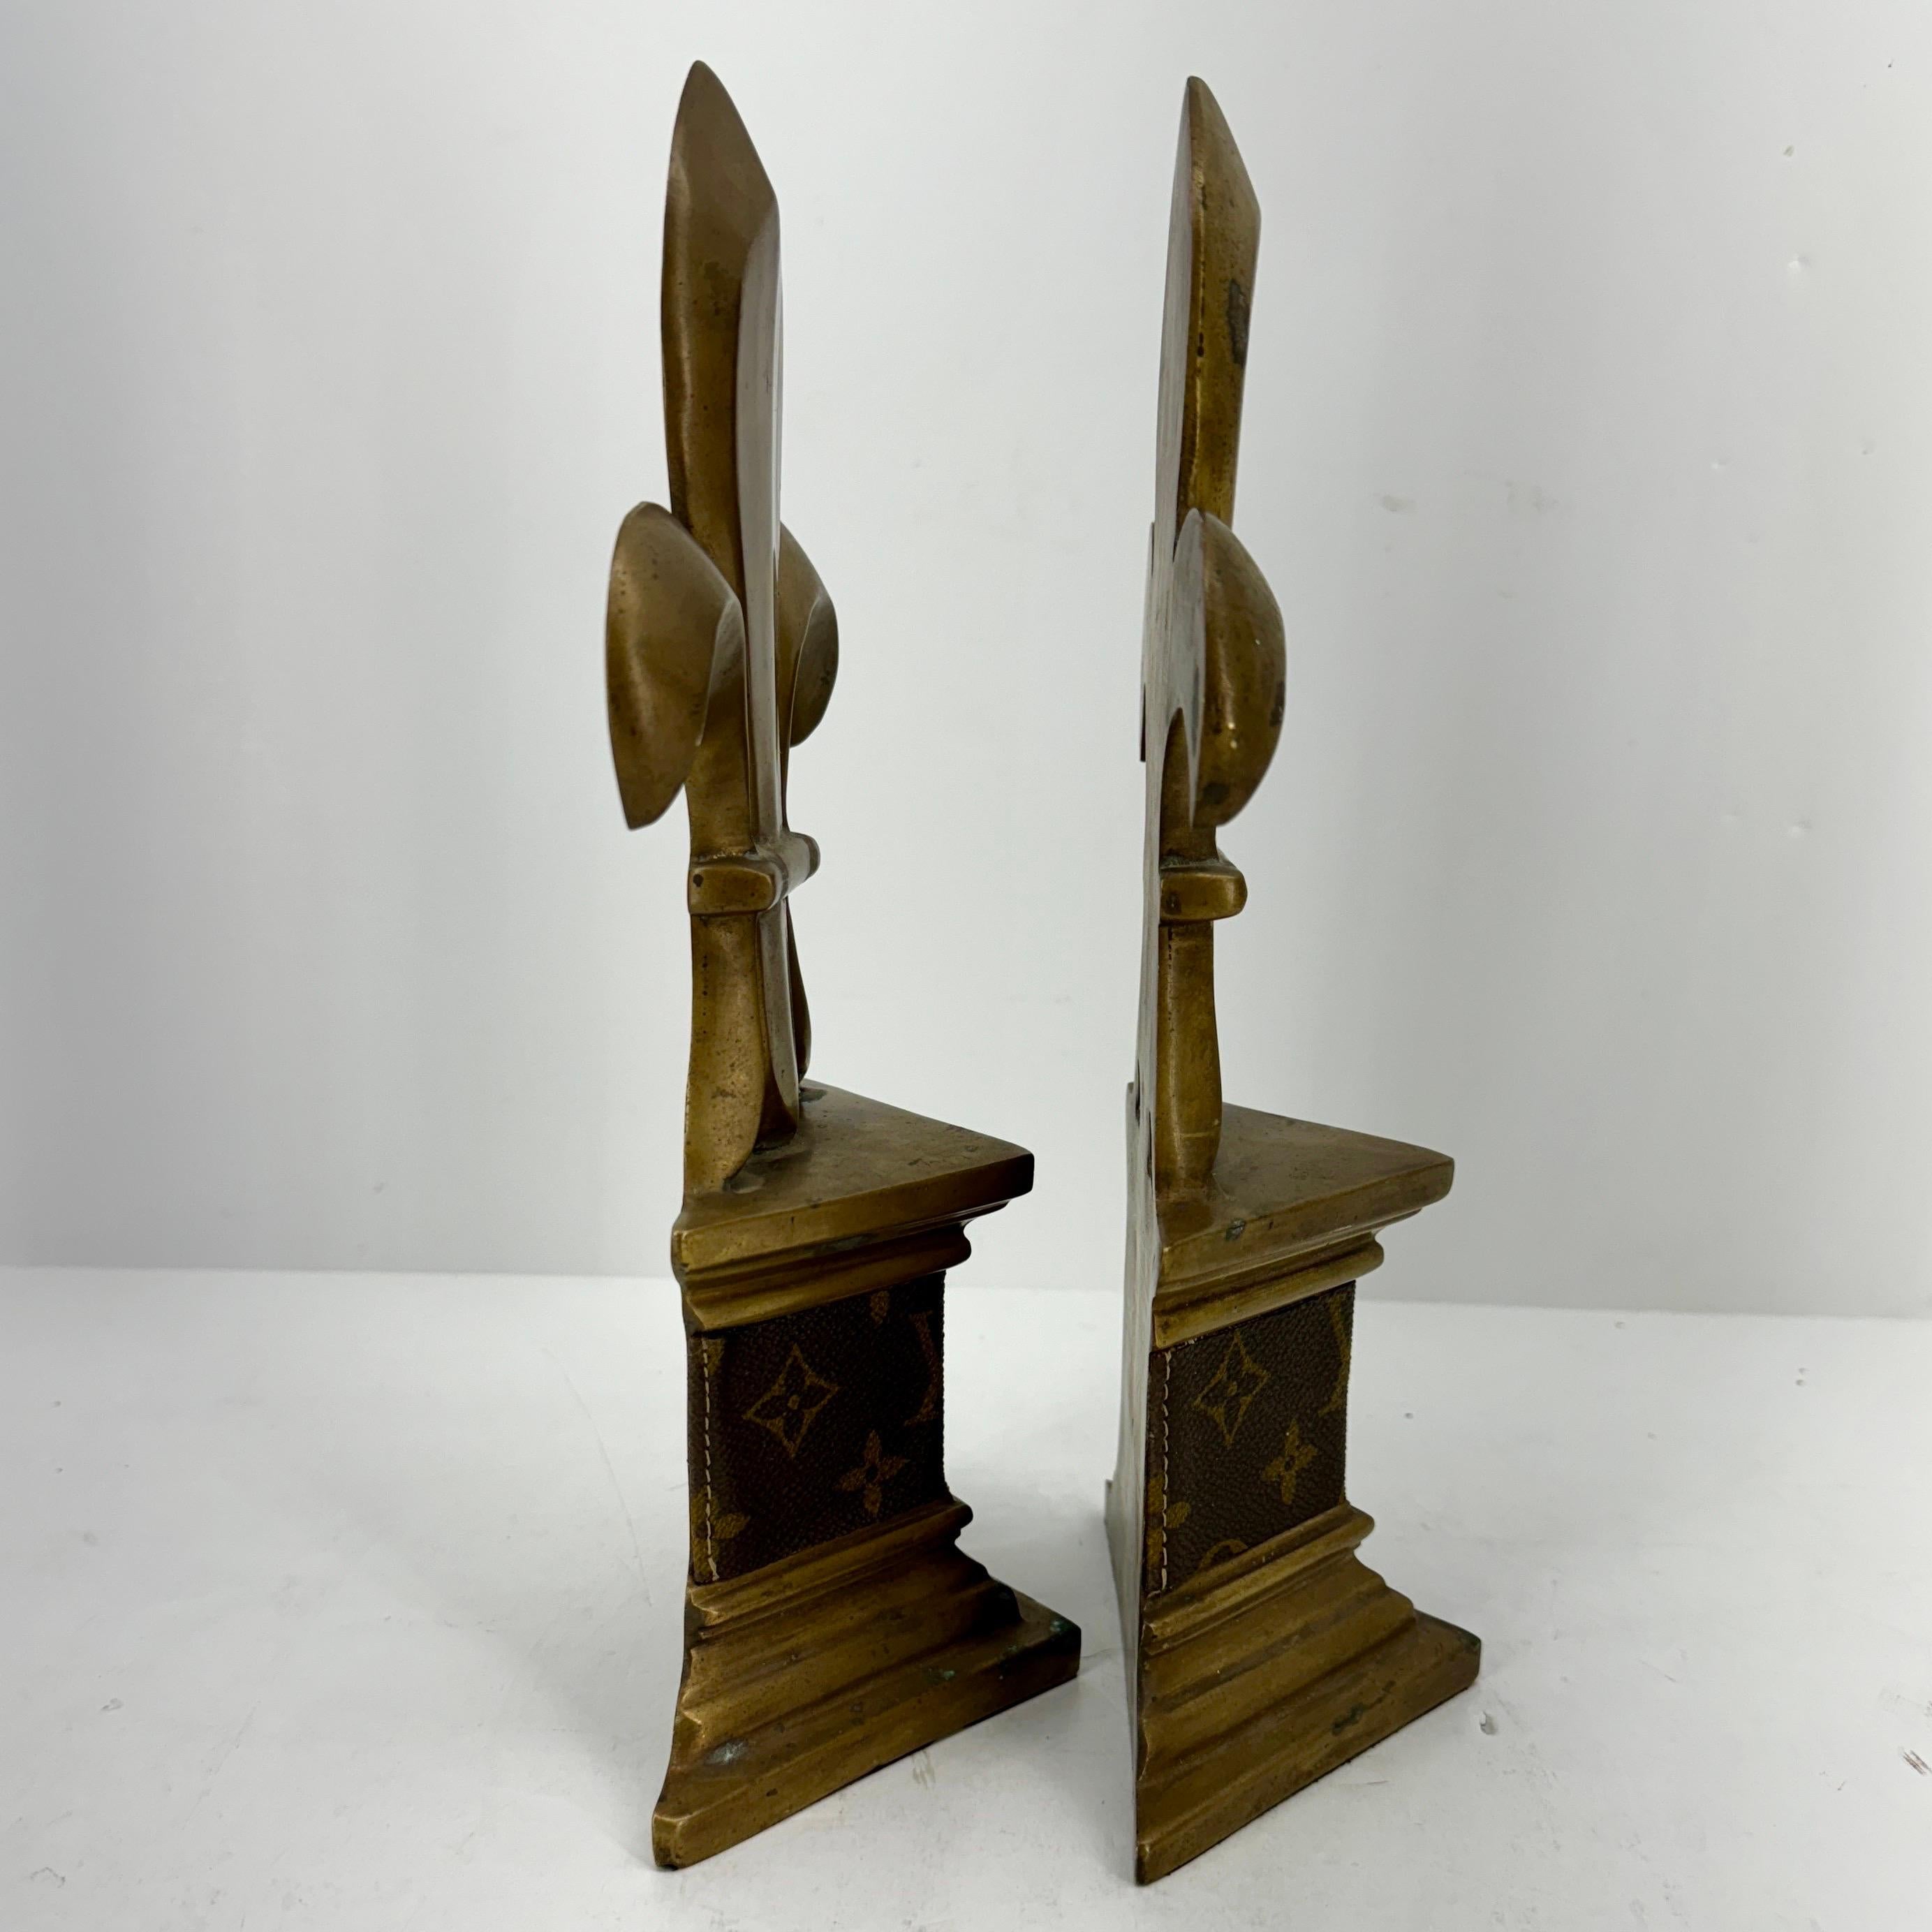  Pair of Mid-Century Brass Bookends with Louis Vuitton Monogram Fabric For Sale 5